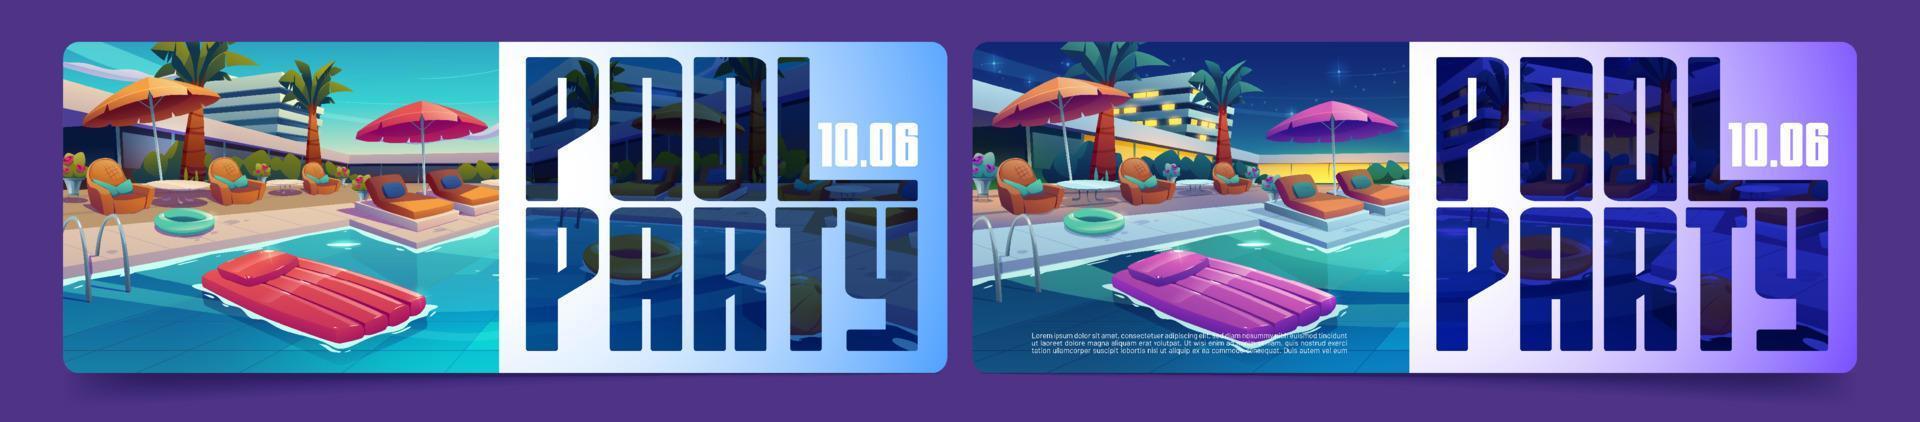 Pool party banners, invitation for resort event vector